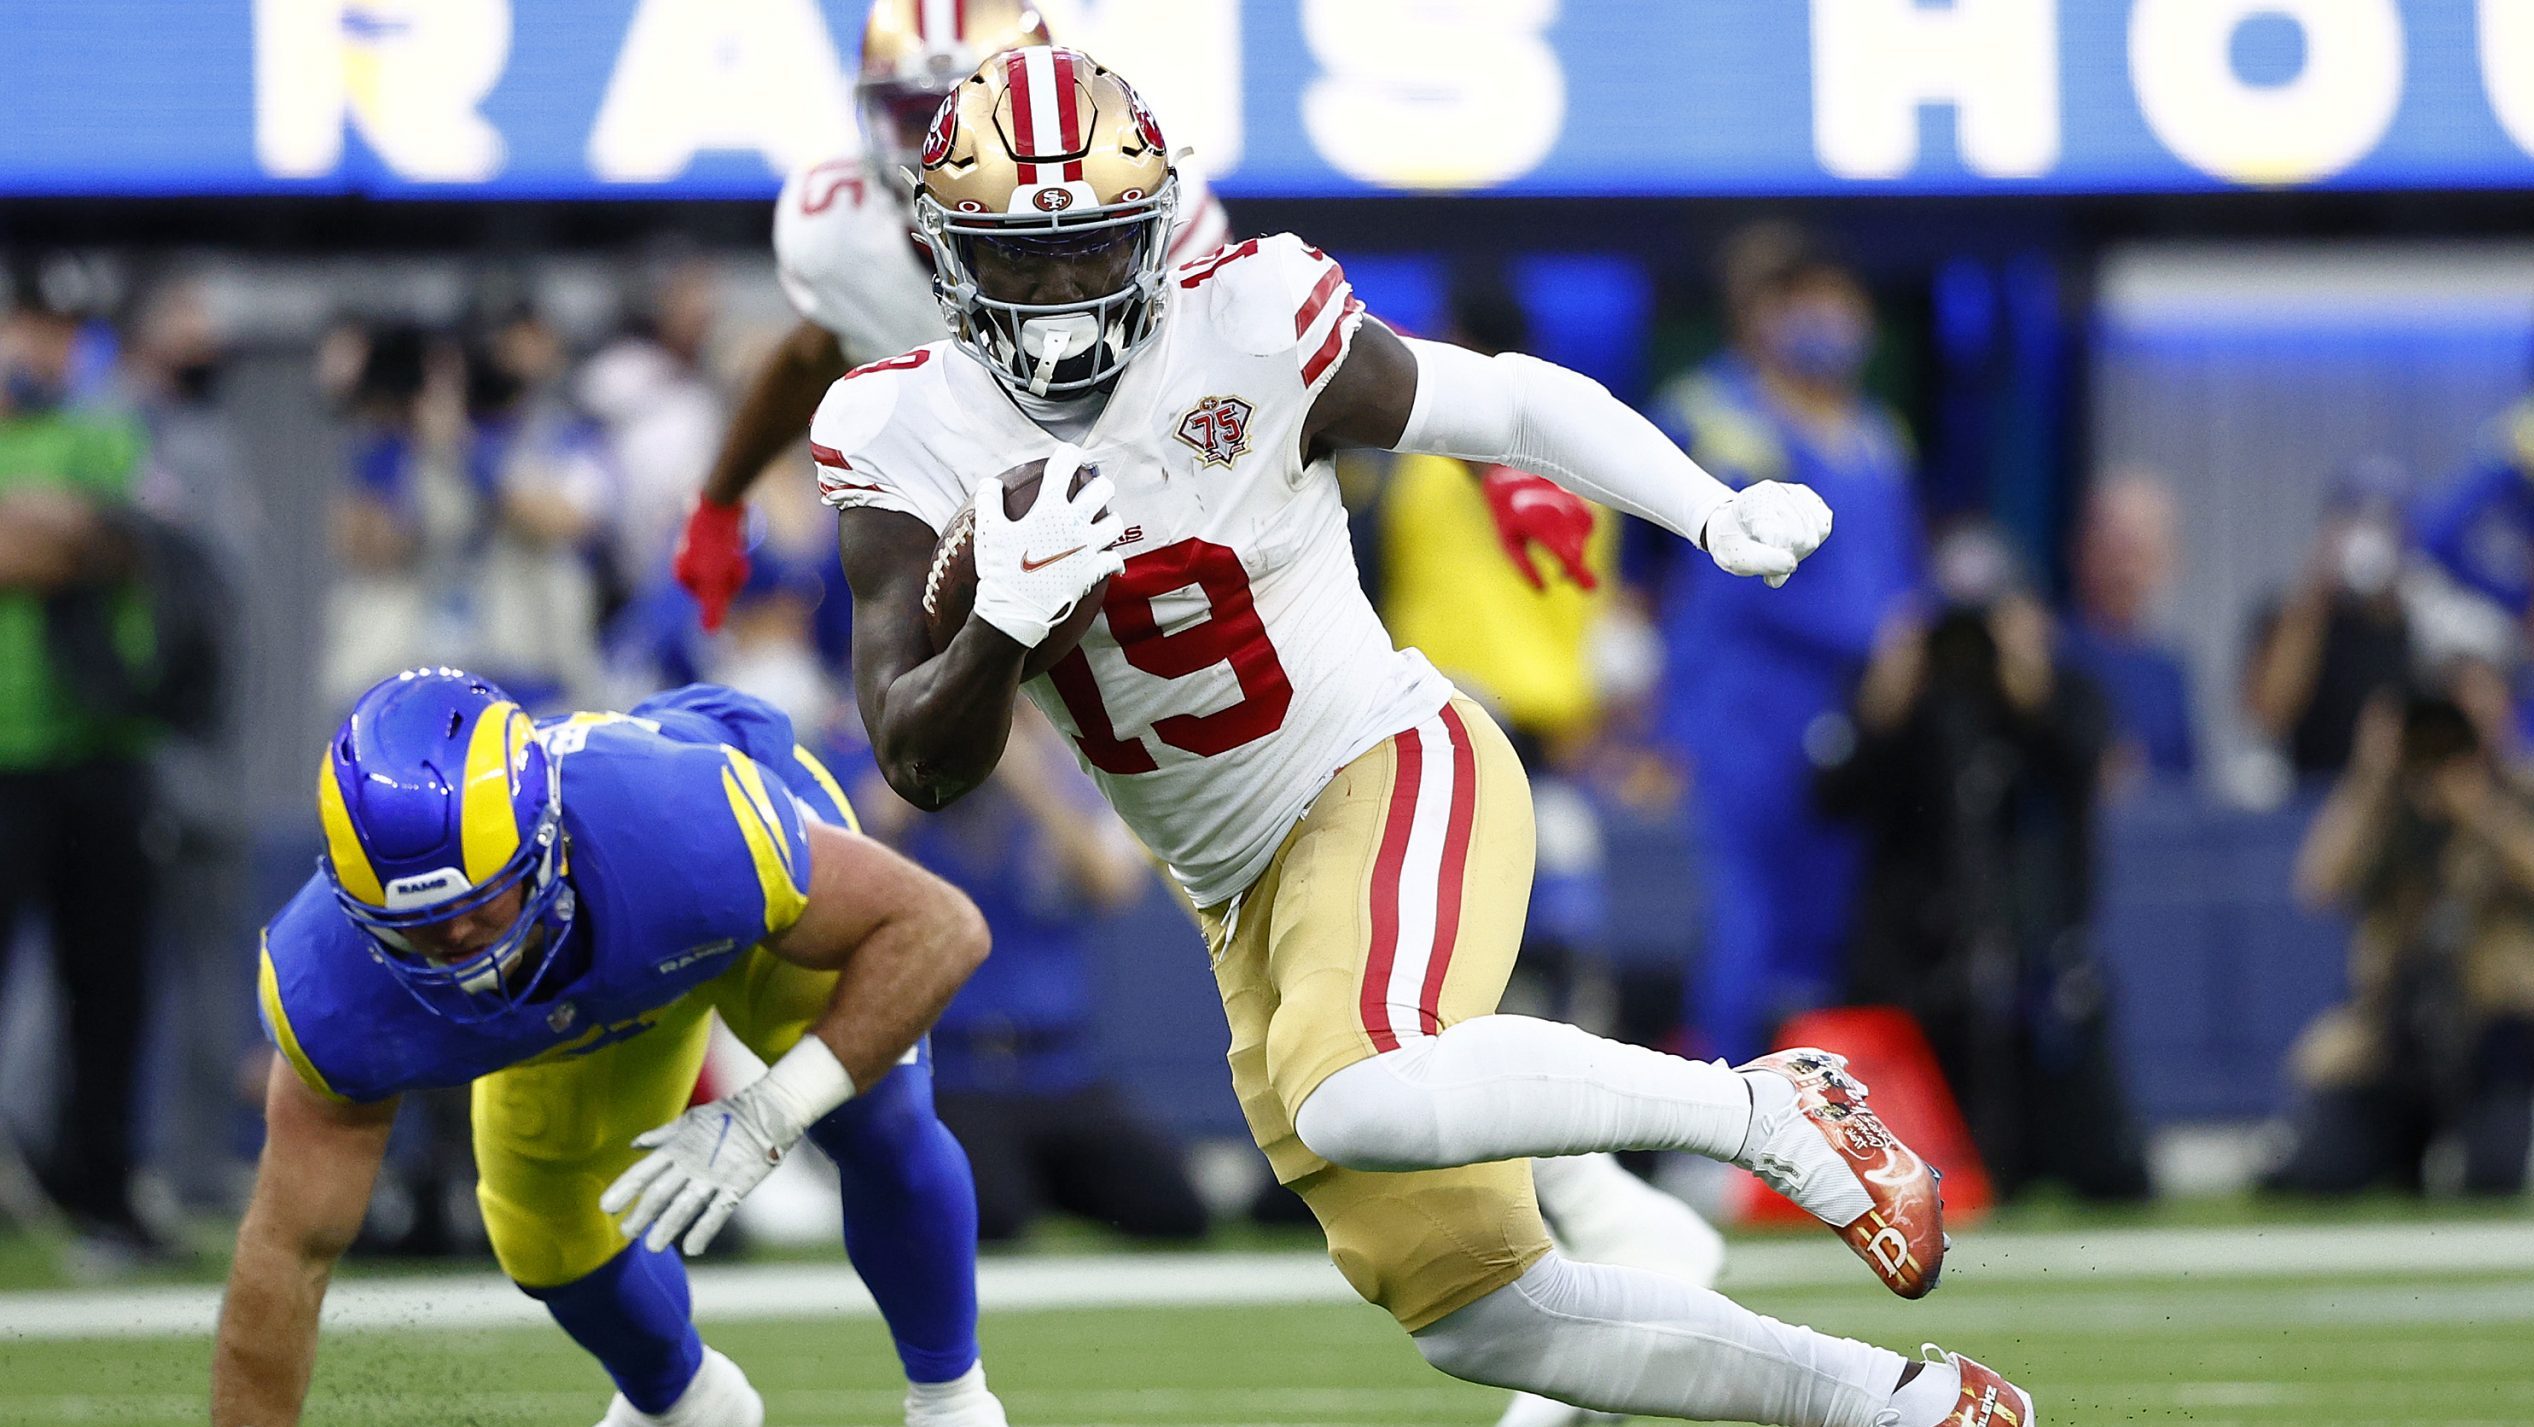 NFC West offseason outlook: The San Francisco 49ers